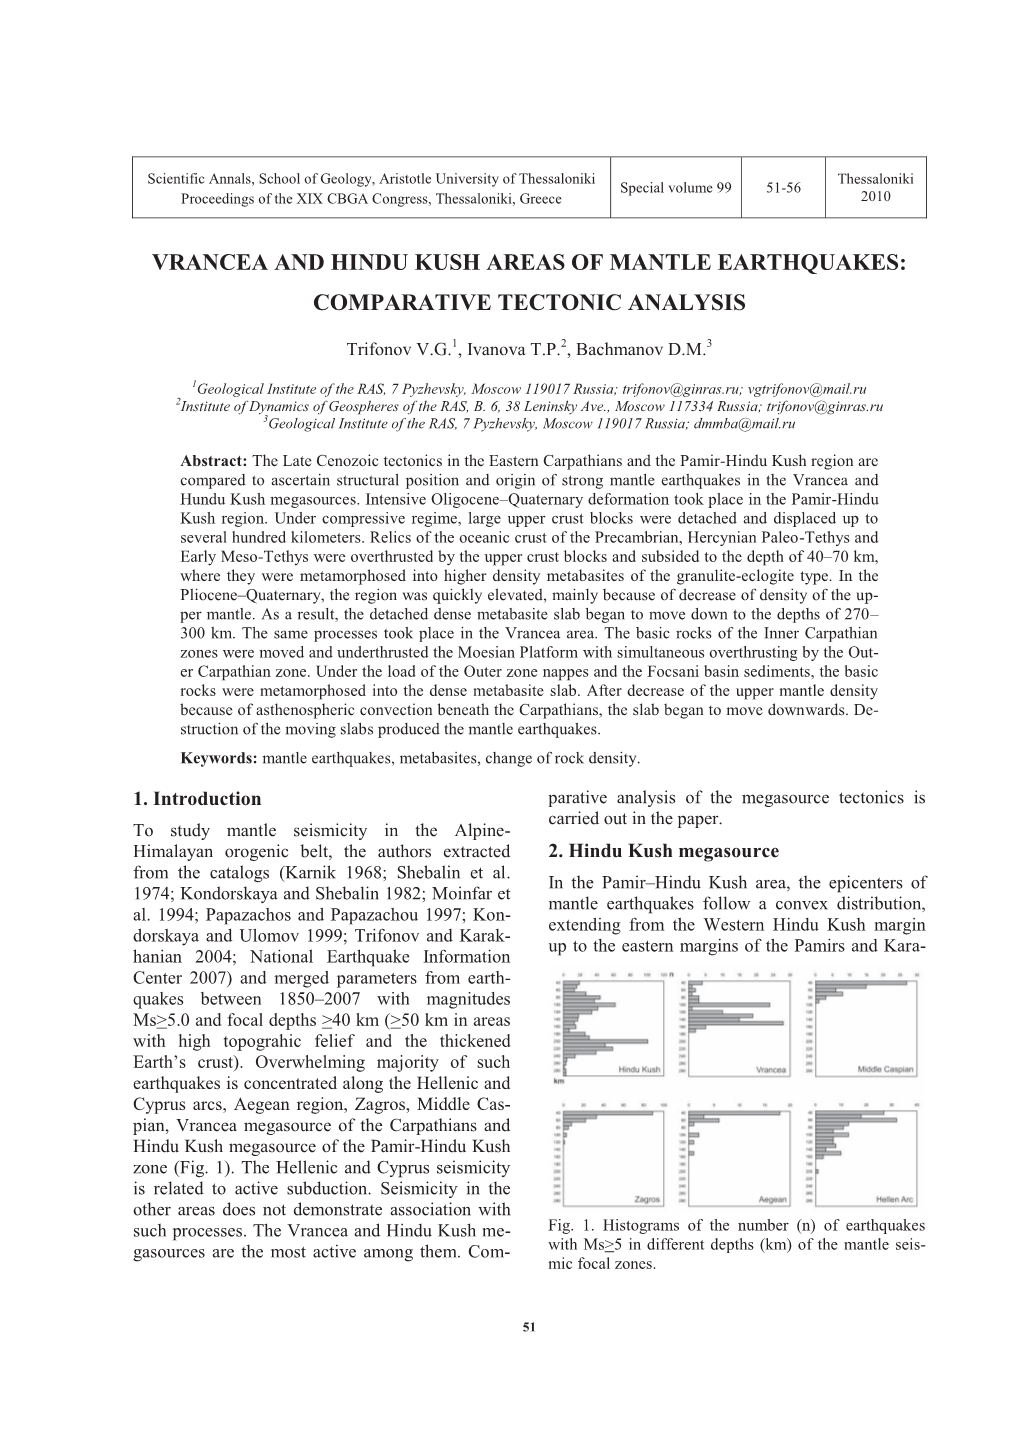 Vrancea and Hindu Kush Areas of Mantle Earthquakes: Comparative Tectonic Analysis